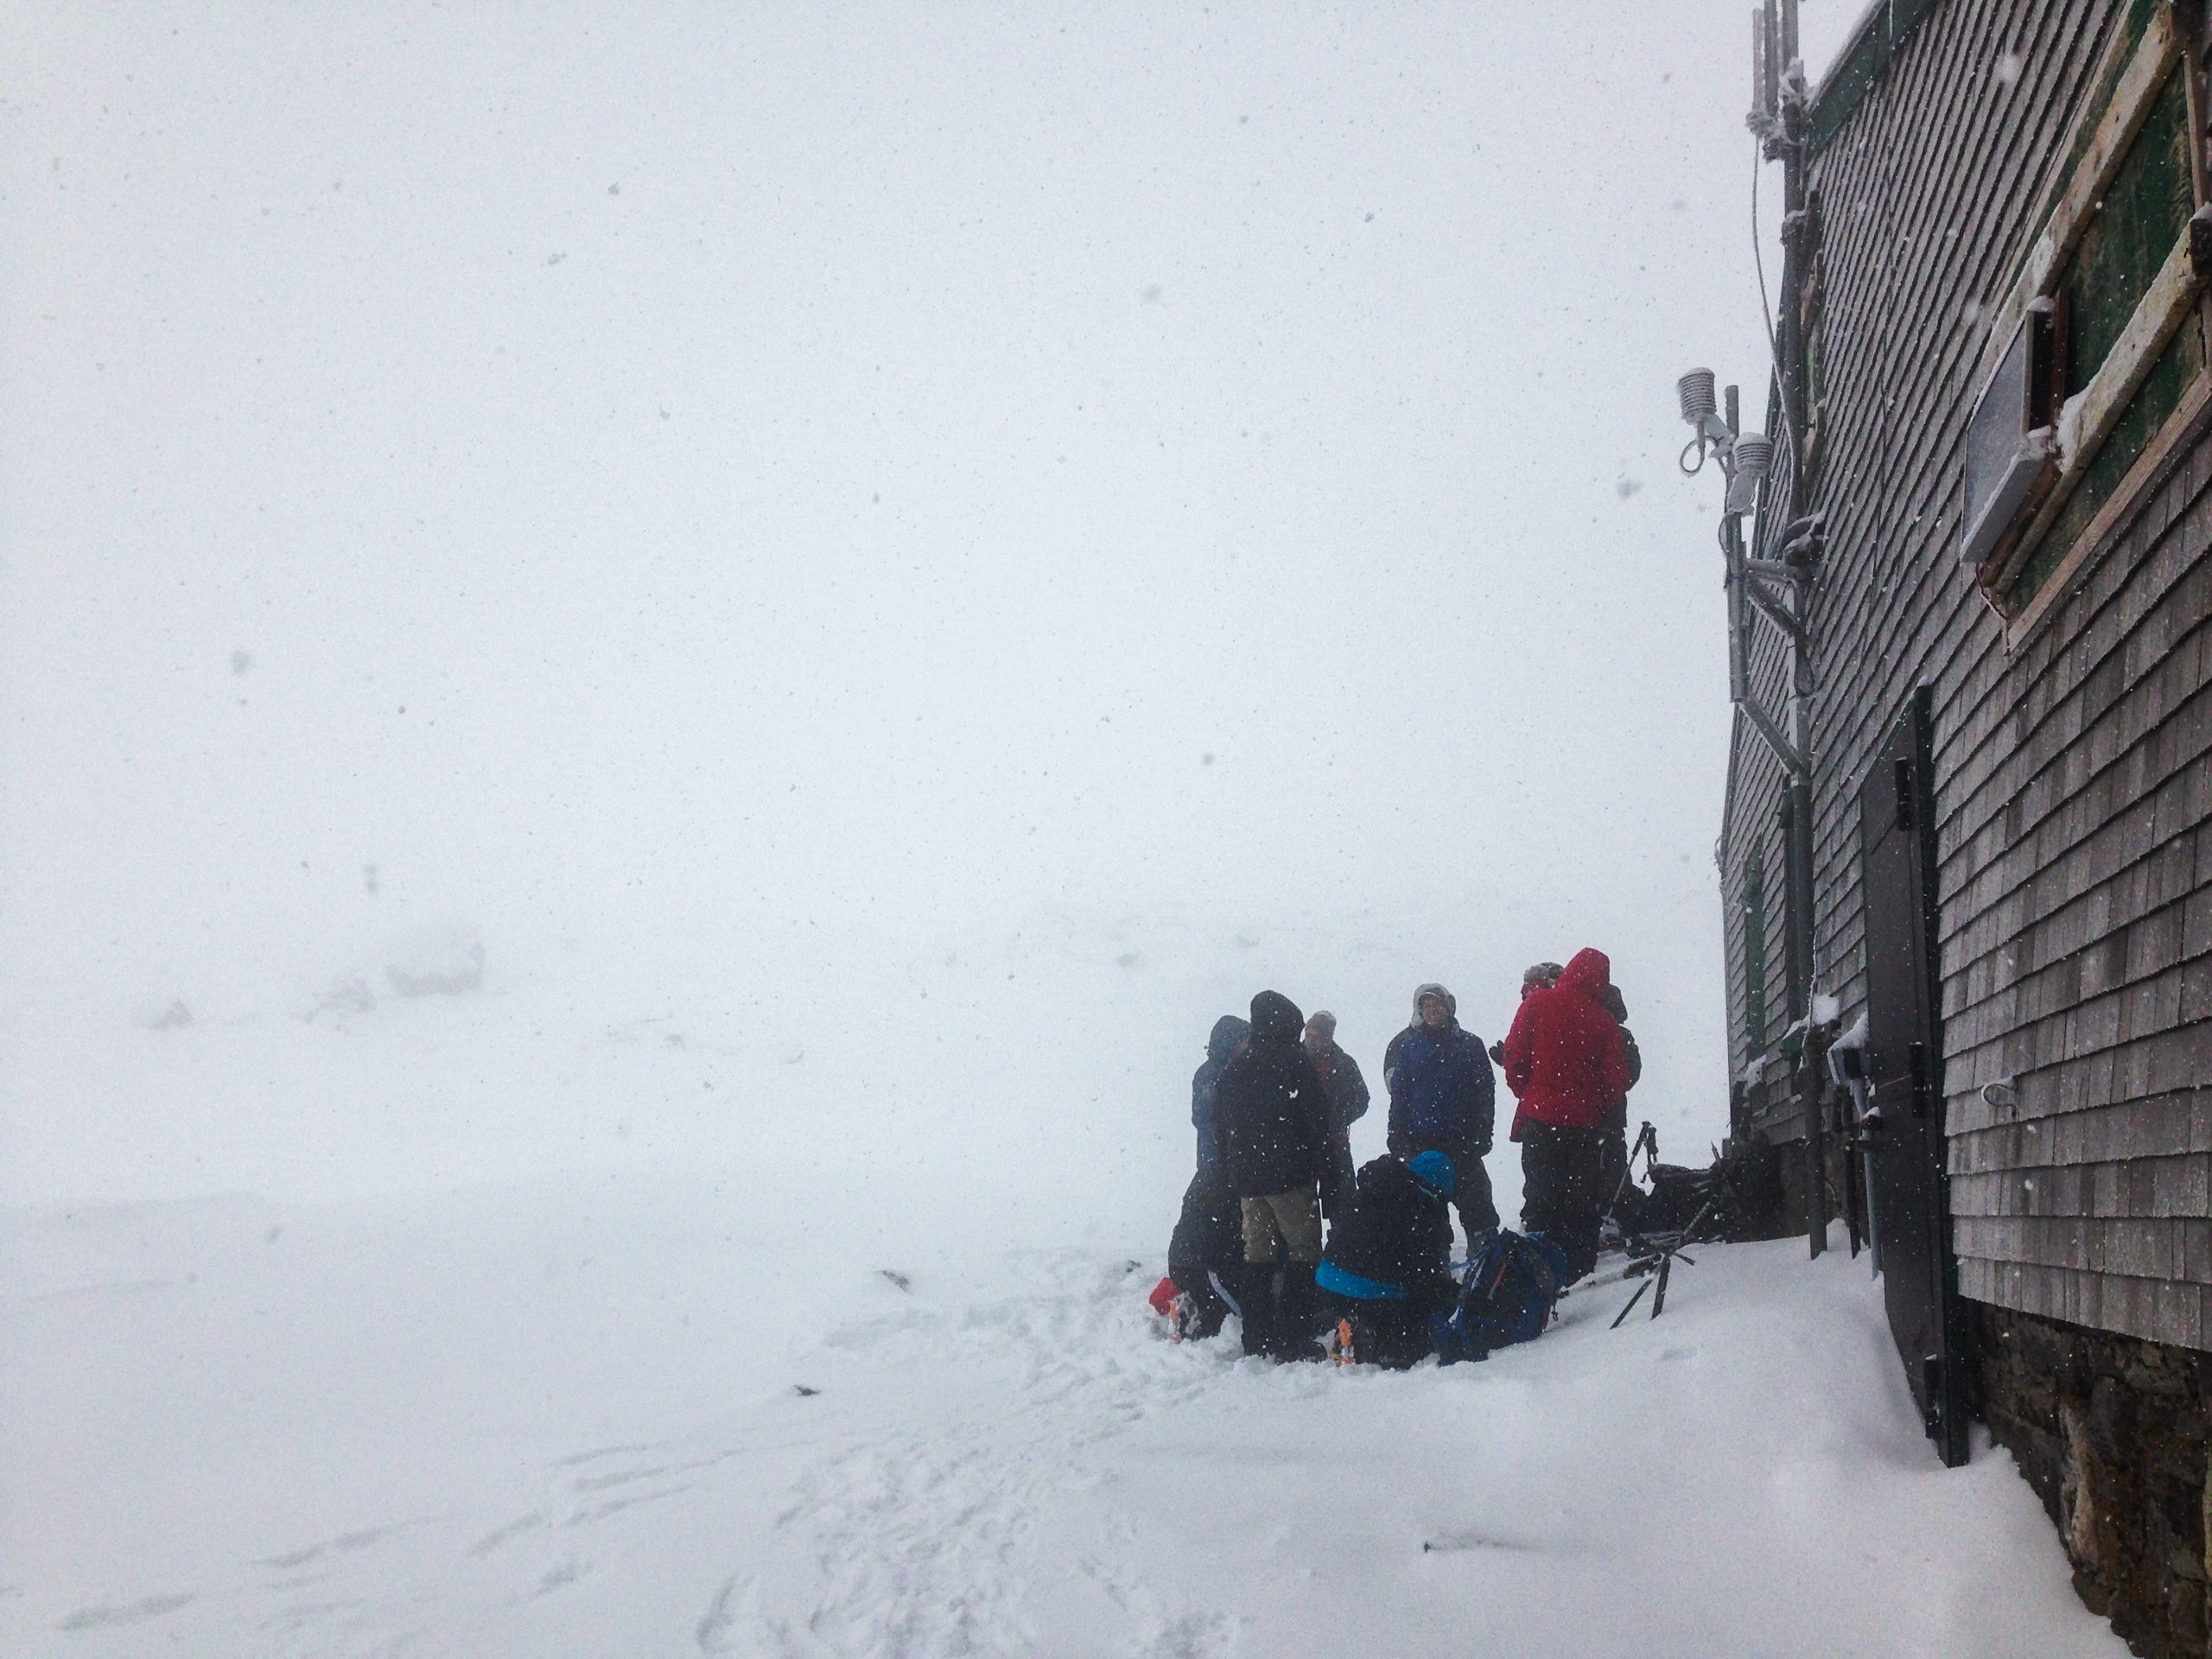 Hikers huddle next to the Lake of the Clouds Hut below Mount Washington's summit cone.